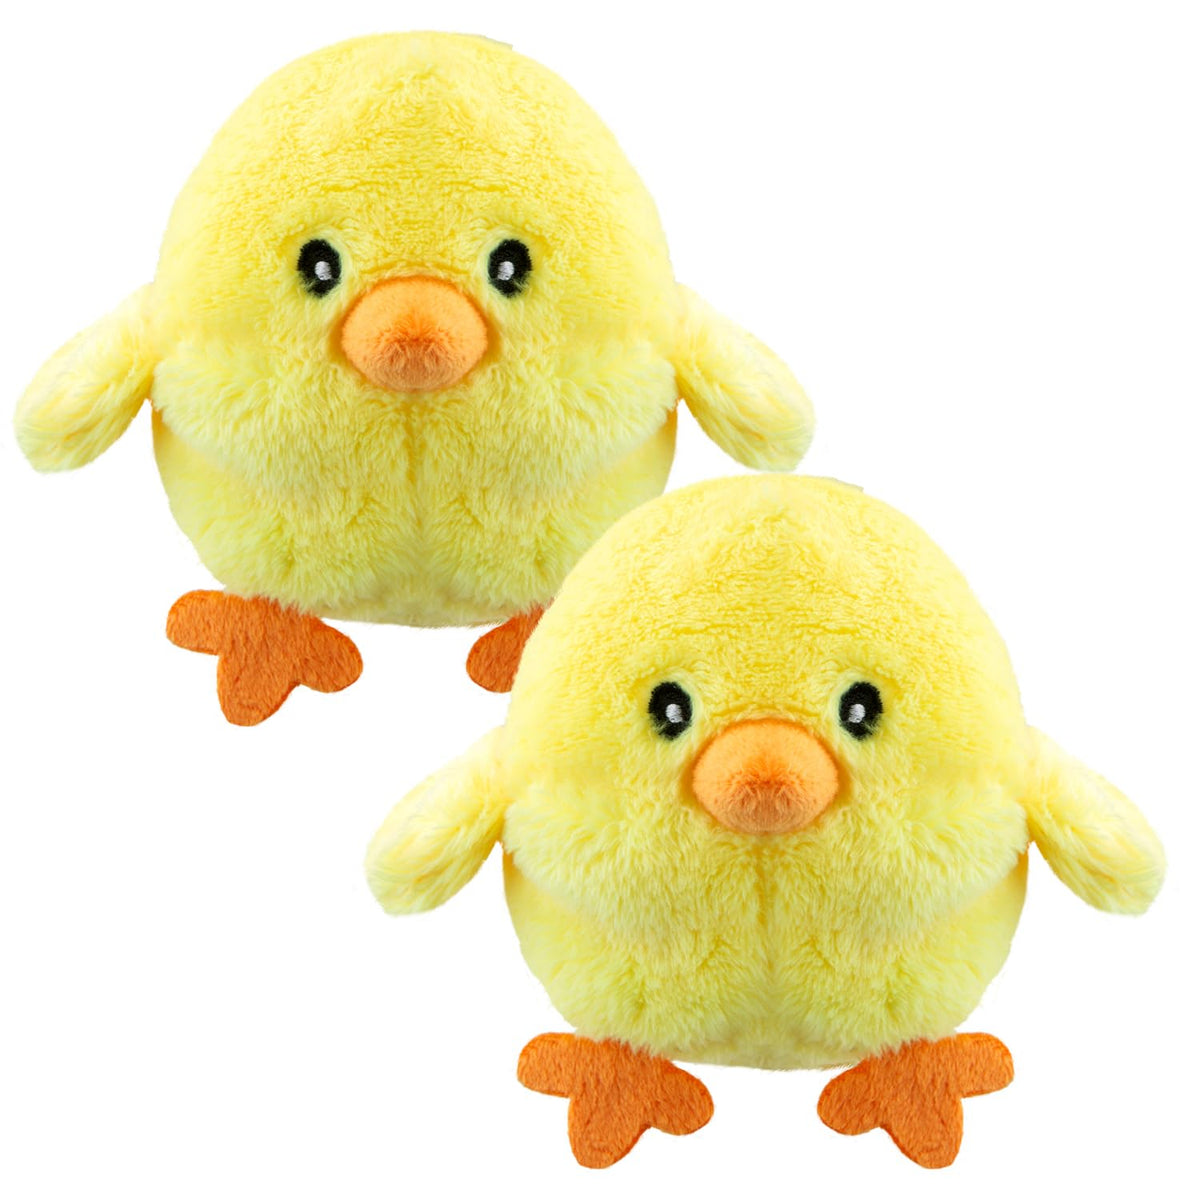 VFM - Baby Chick Soft Easter Toy 10cm - Super Soft Cuddly Farmyard Animal Chicken Toy With Fluffy Yellow Fabric & Embroidered Eyes - Cute Easter Gift For Kids (2 Pack)